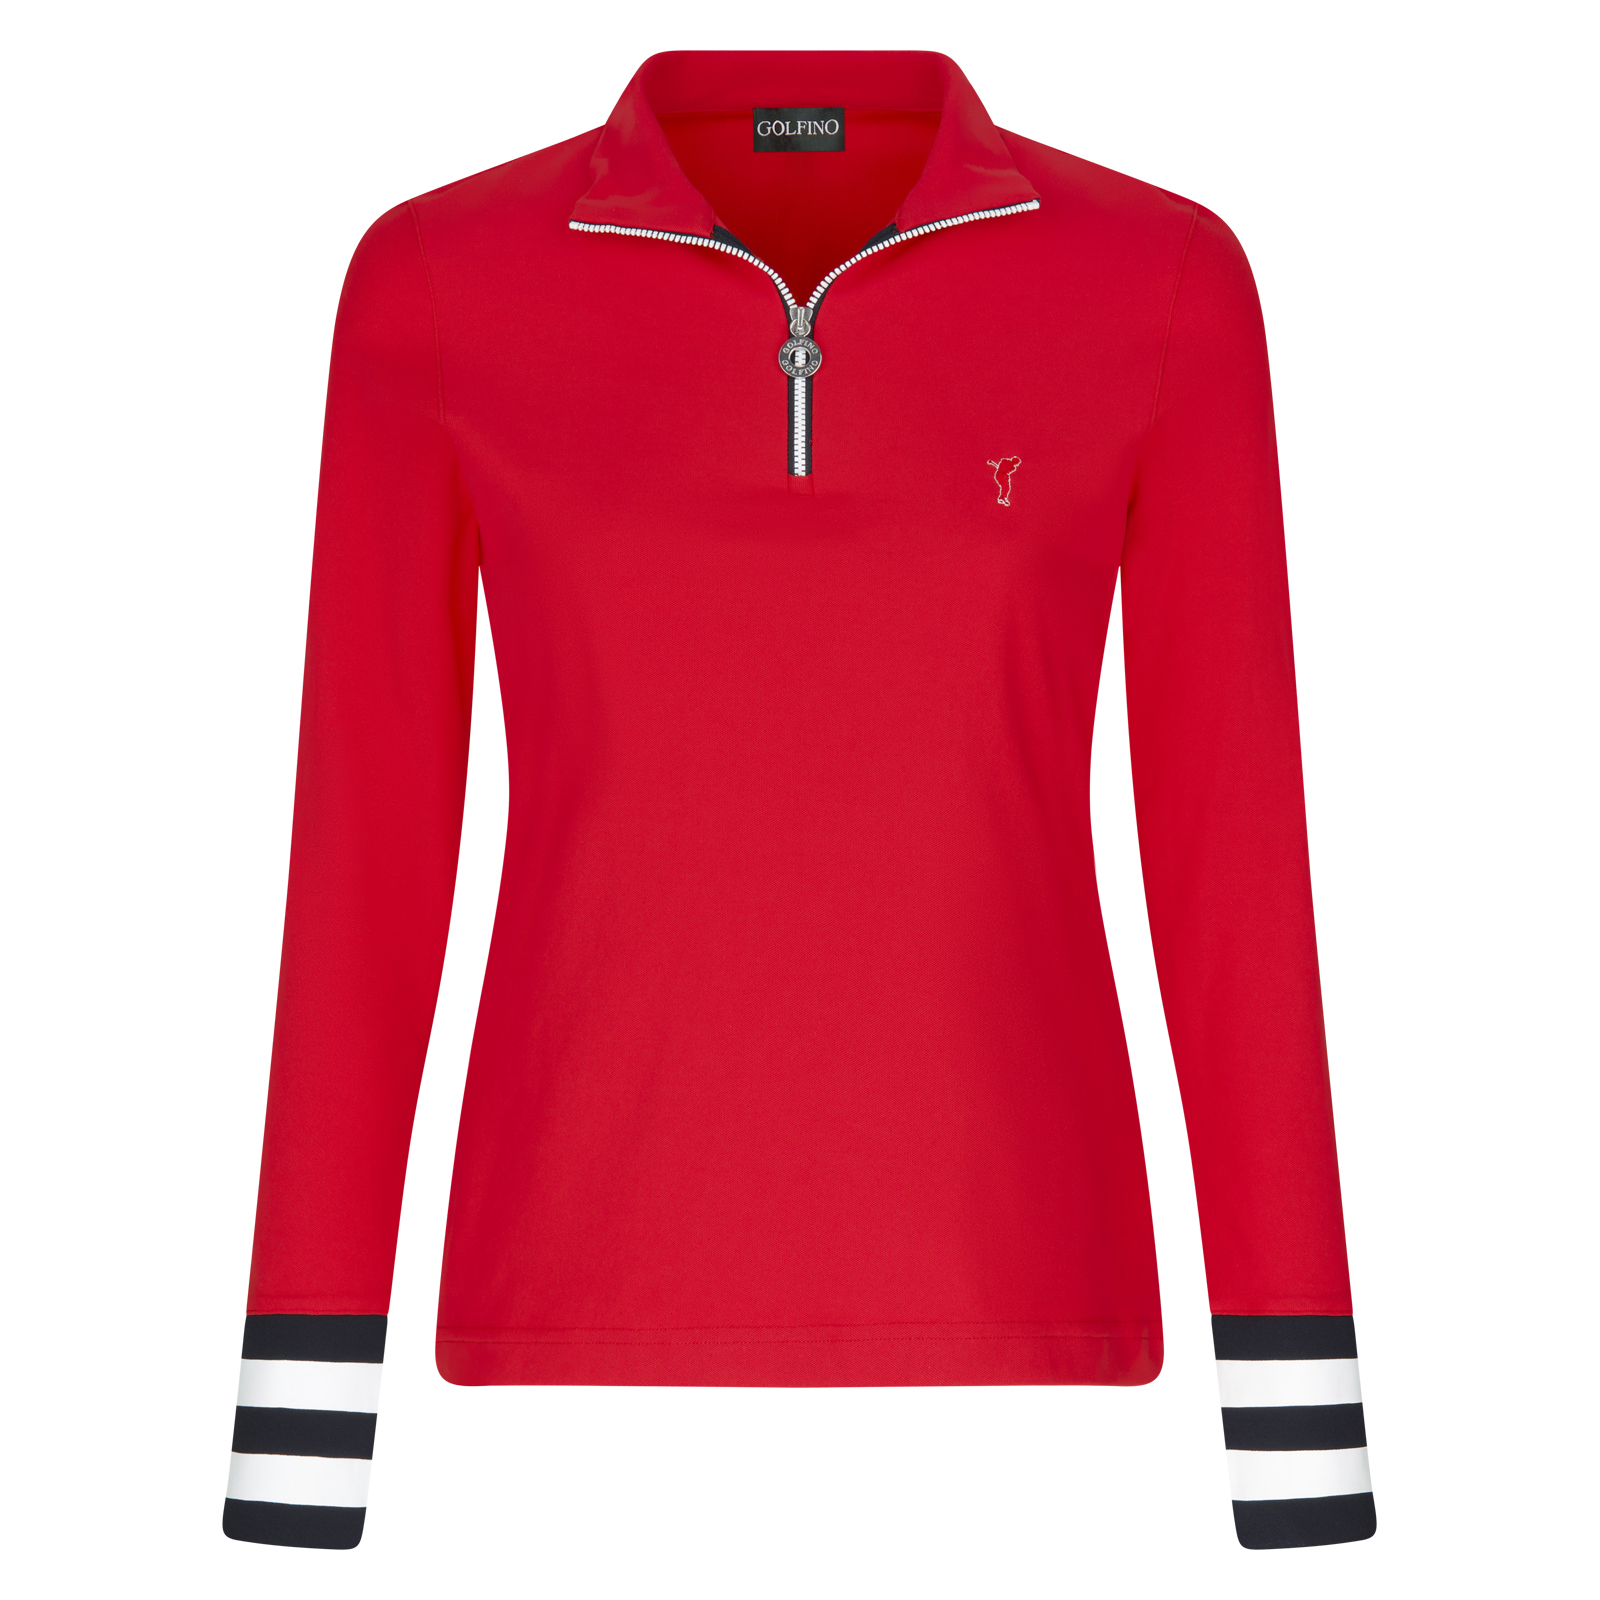 Ladies' modern golf troyer with moisture management and cold protection functions